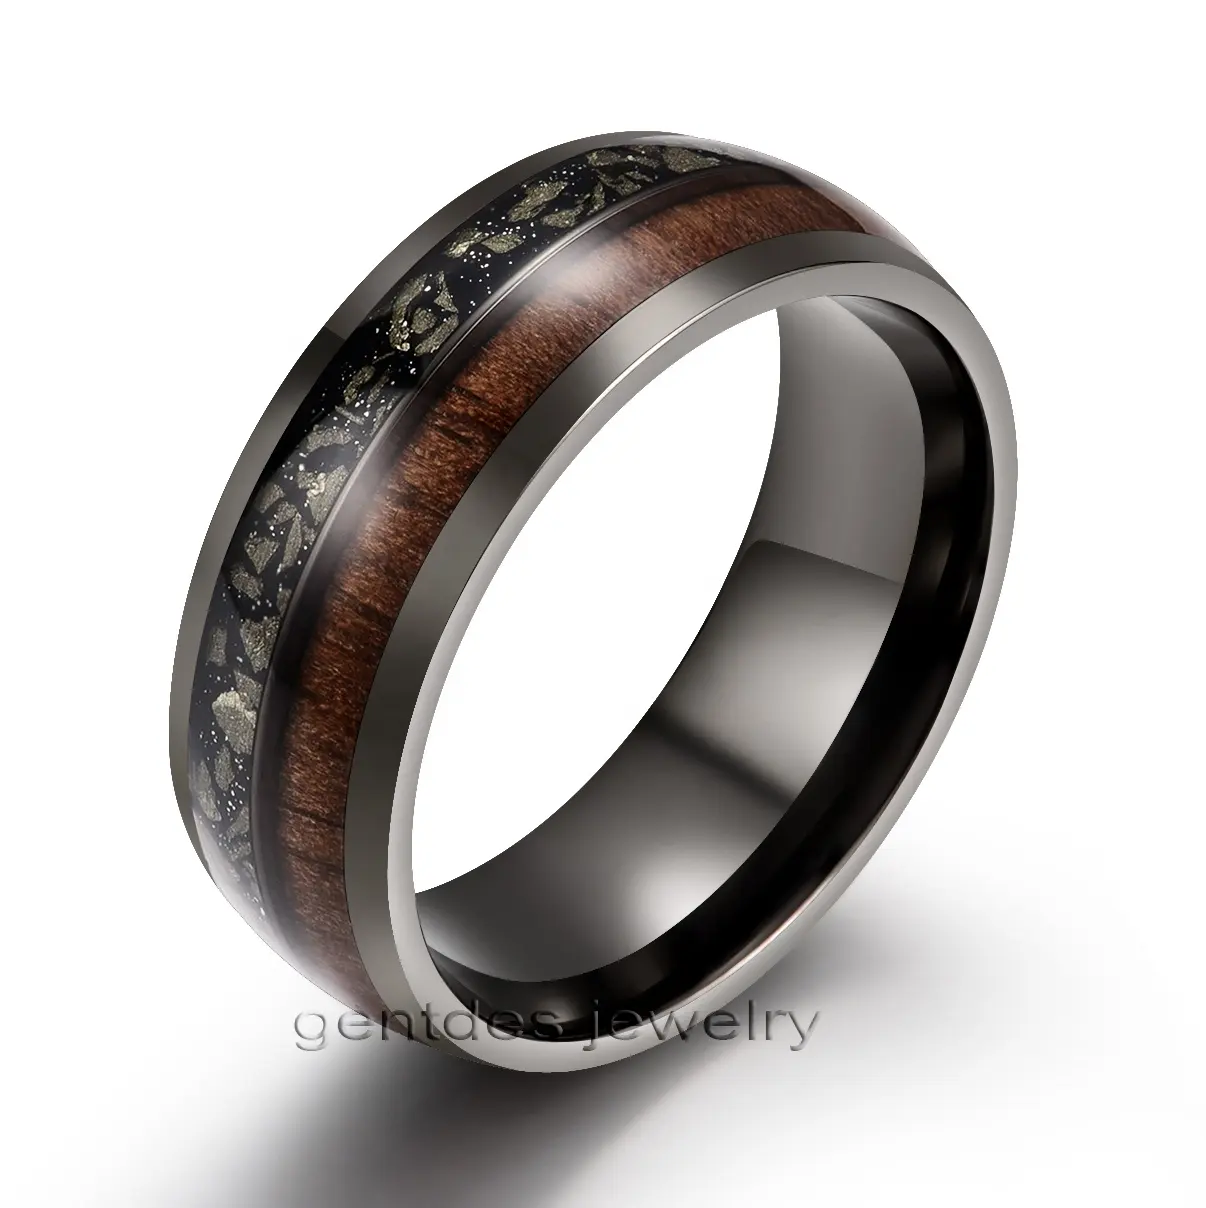 Gentdes Jewelry 8mm Ceramic Rings For Man Jewelry Inlay Stone and Walnut Wood Wedding Bands Rings for Boys Titanium Ring